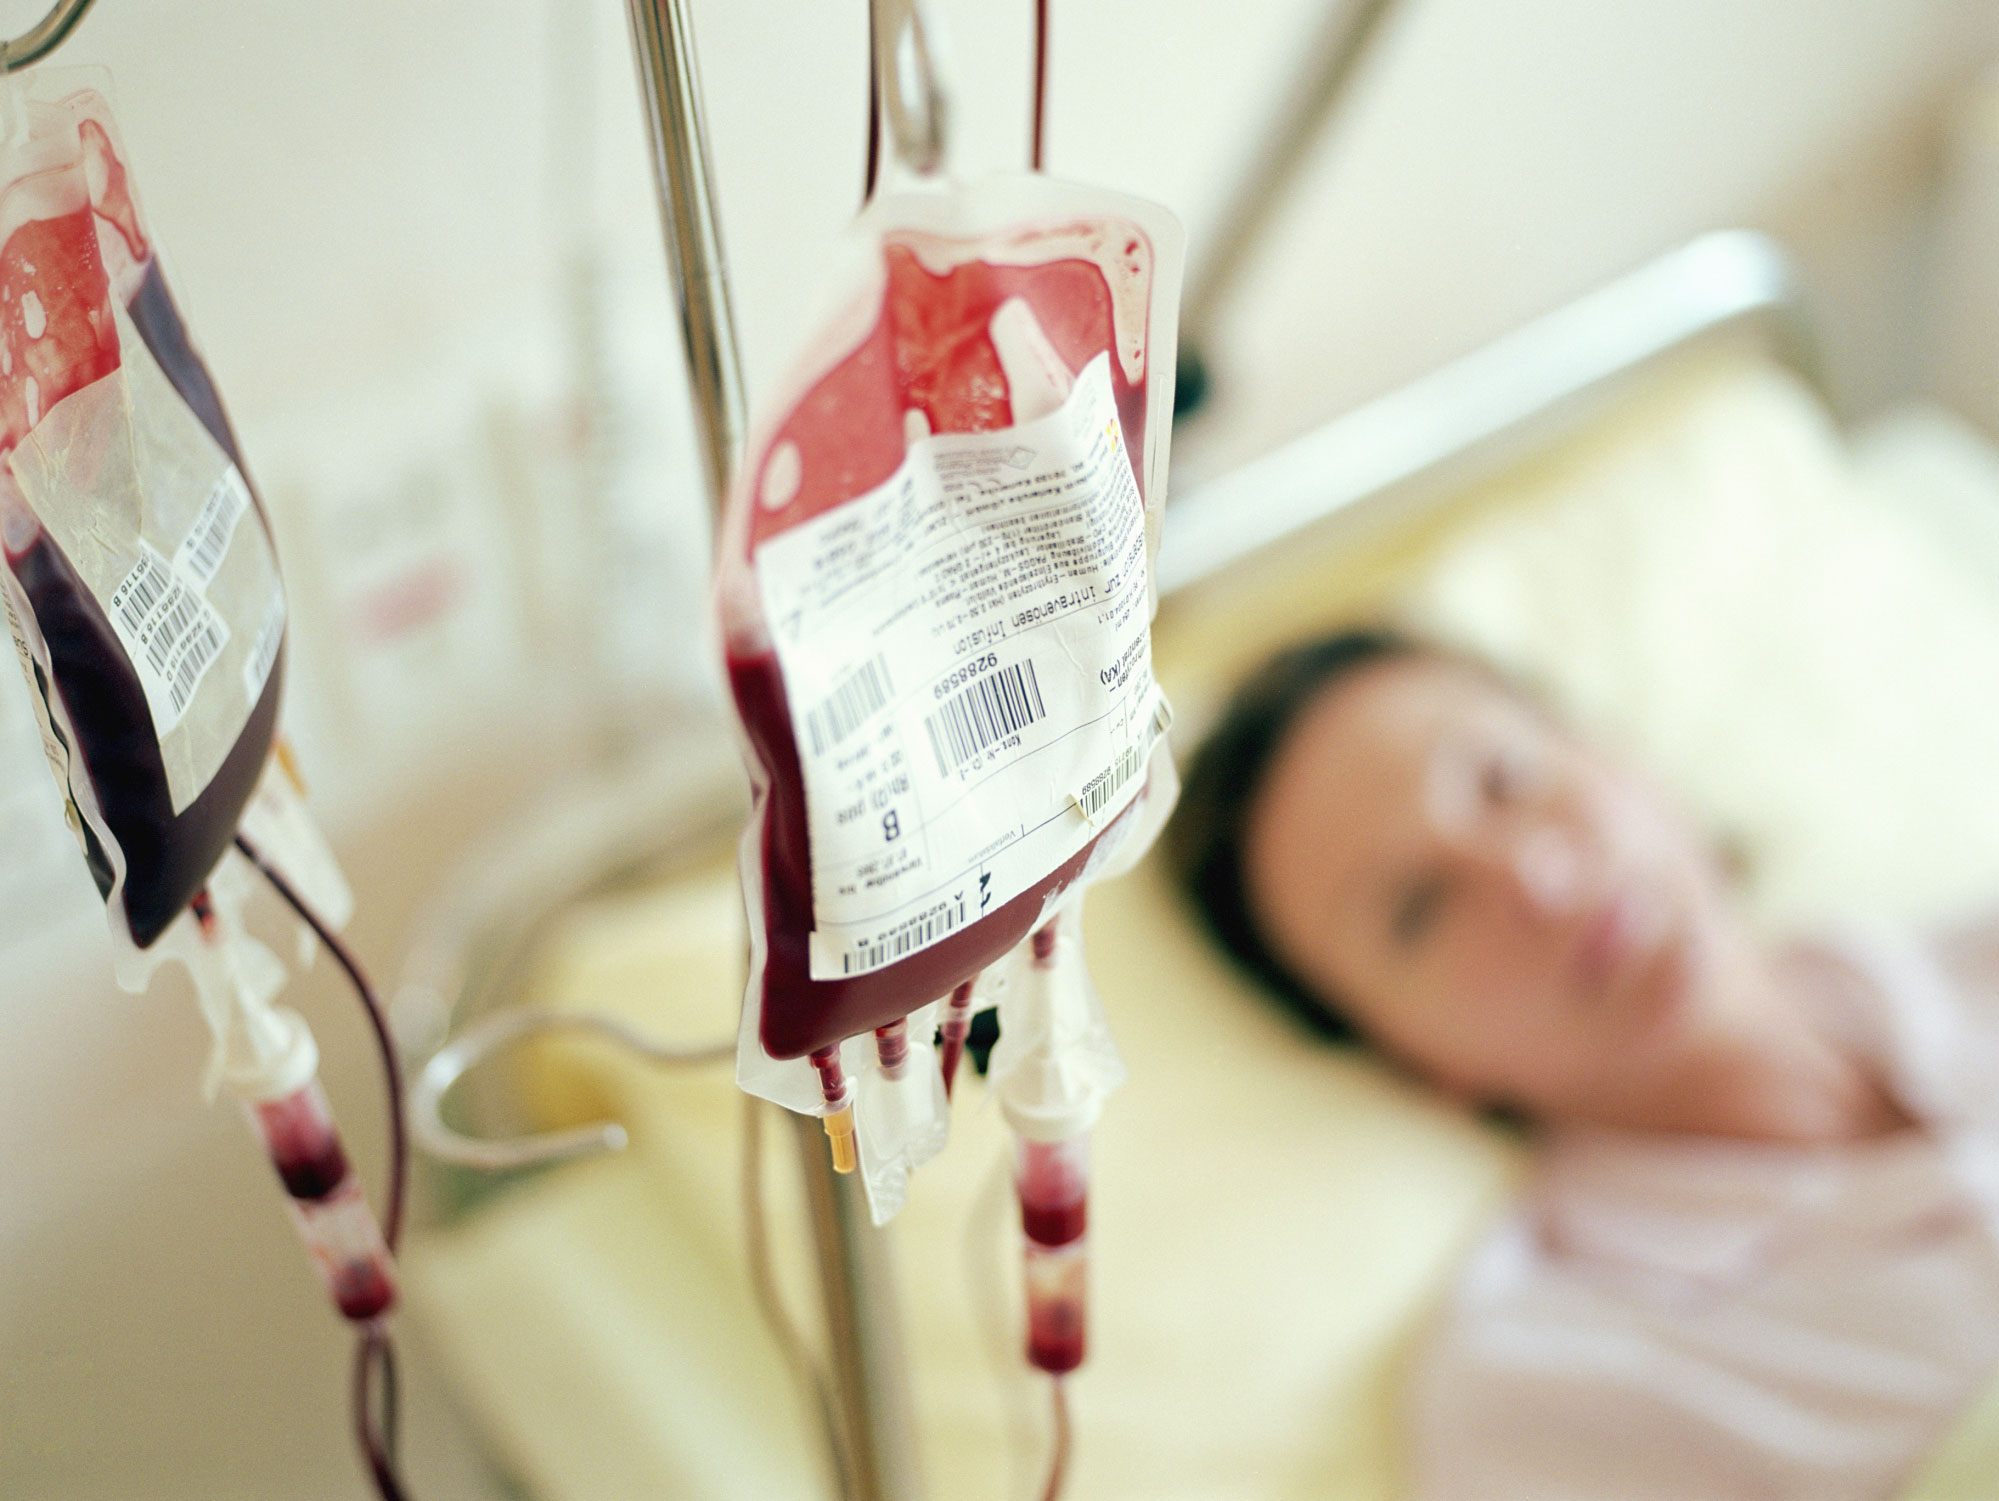 Storing Blood Before Transfusion | National Institutes of Health (NIH)